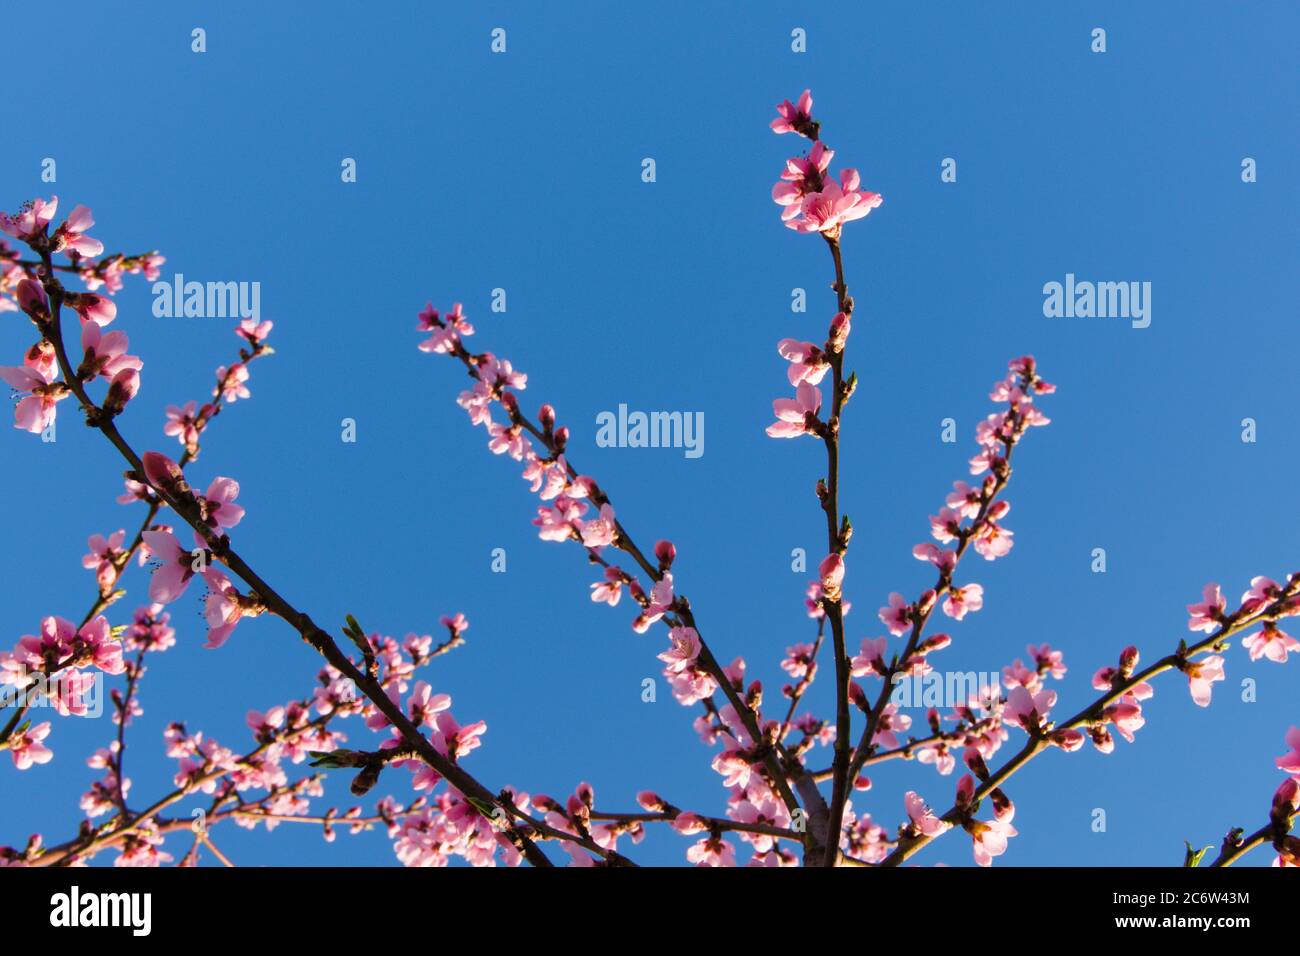 Pink blossoms on the branches of a peach tree on a blue sky as background Stock Photo